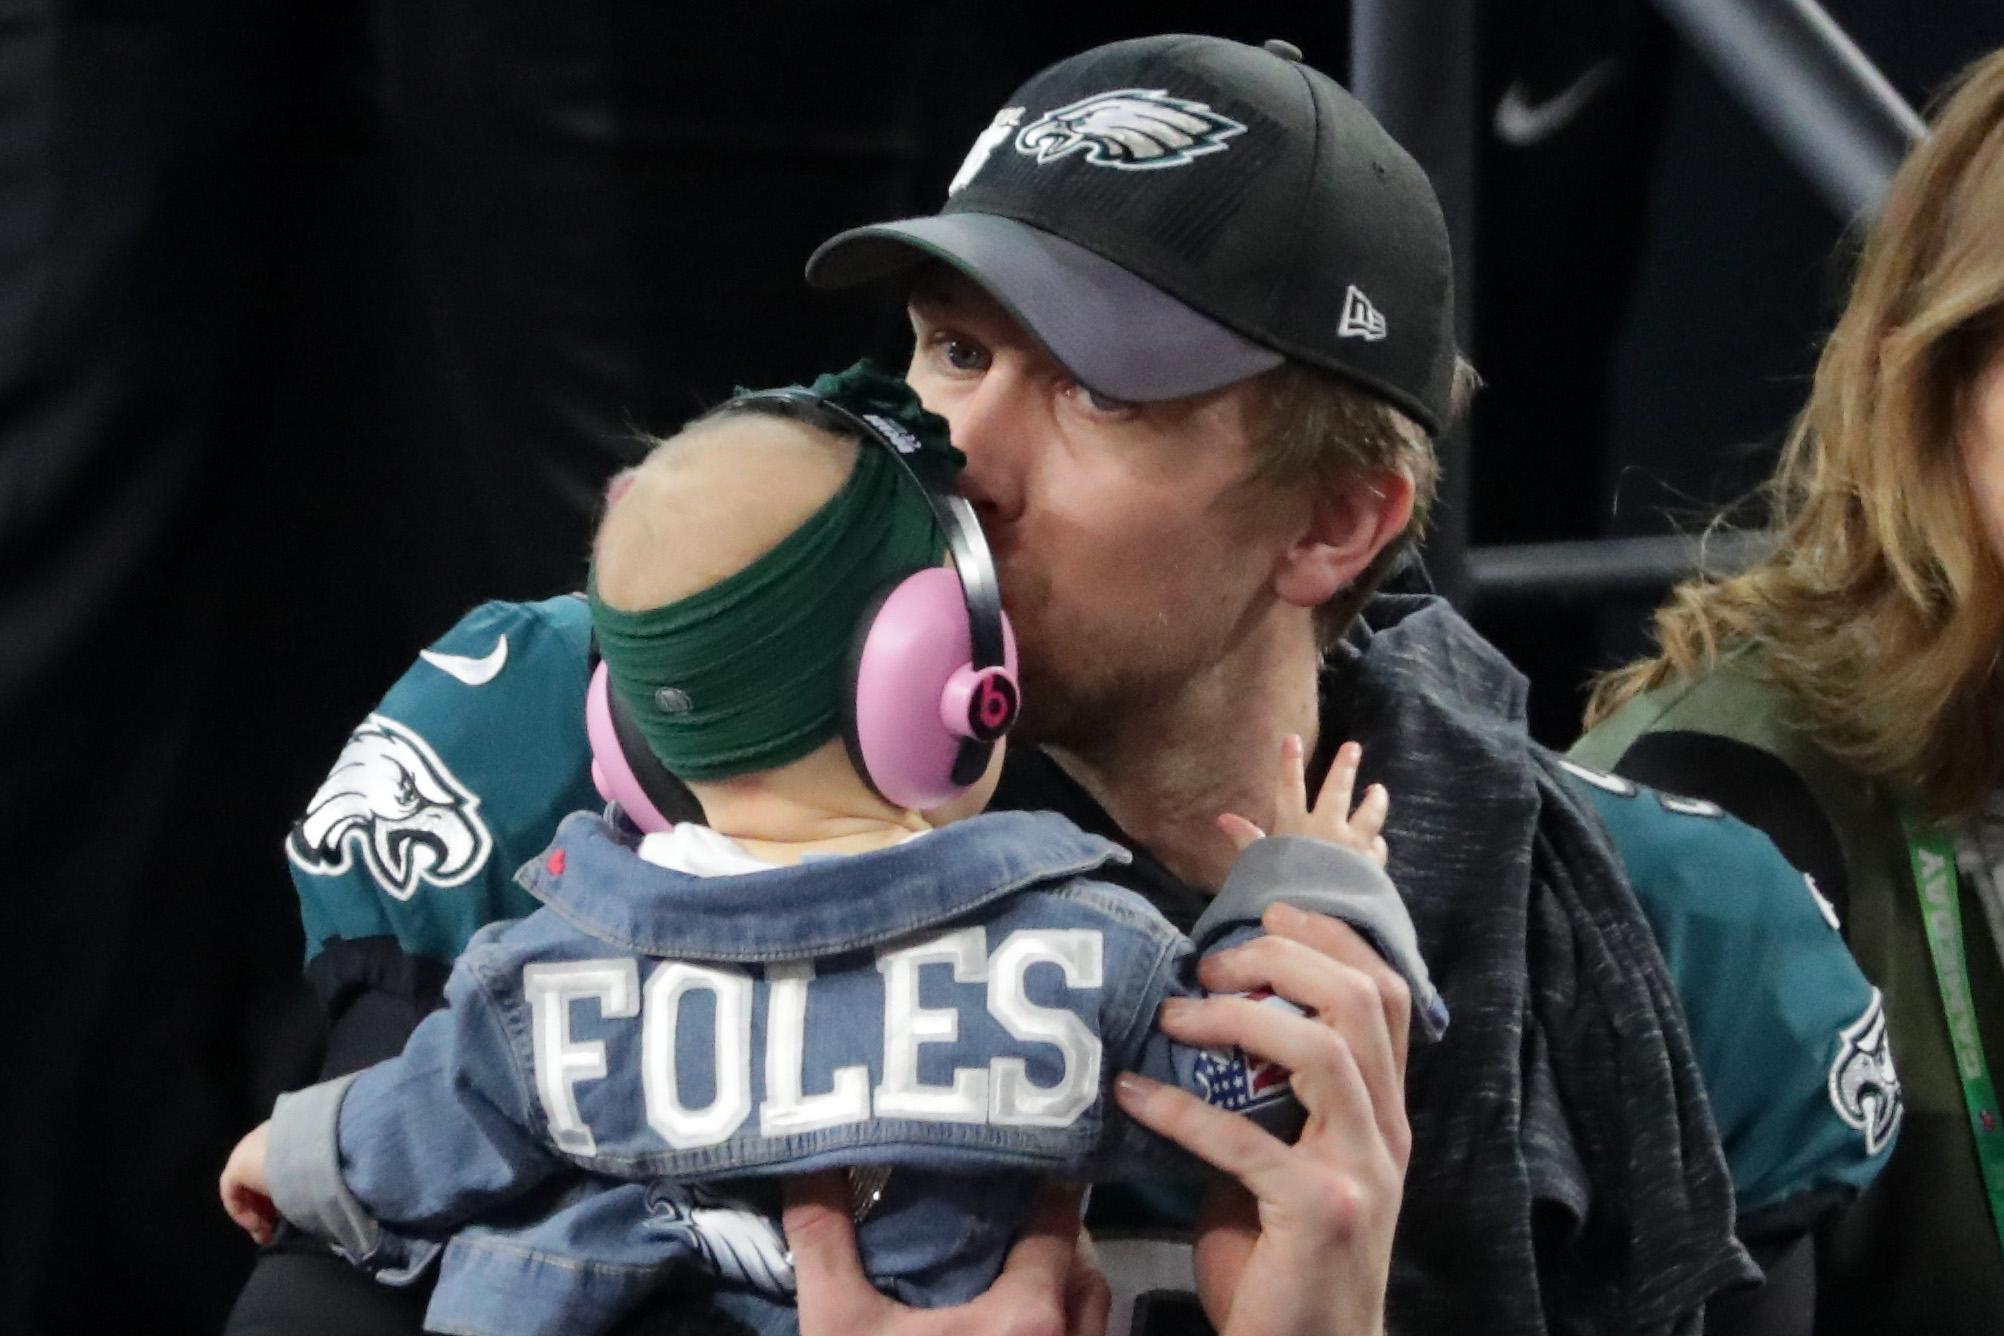 MINNEAPOLIS, MN - FEBRUARY 04:  Nick Foles #9 of the Philadelphia Eagles celebrates with his daughter Lily Foles after his 41-33 victory over the New England Patriots in Super Bowl LII at U.S. Bank Stadium on February 4, 2018 in Minneapolis, Minnesota. The Philadelphia Eagles defeated the New England Patriots 41-33.  (Photo by Streeter Lecka/Getty Images)